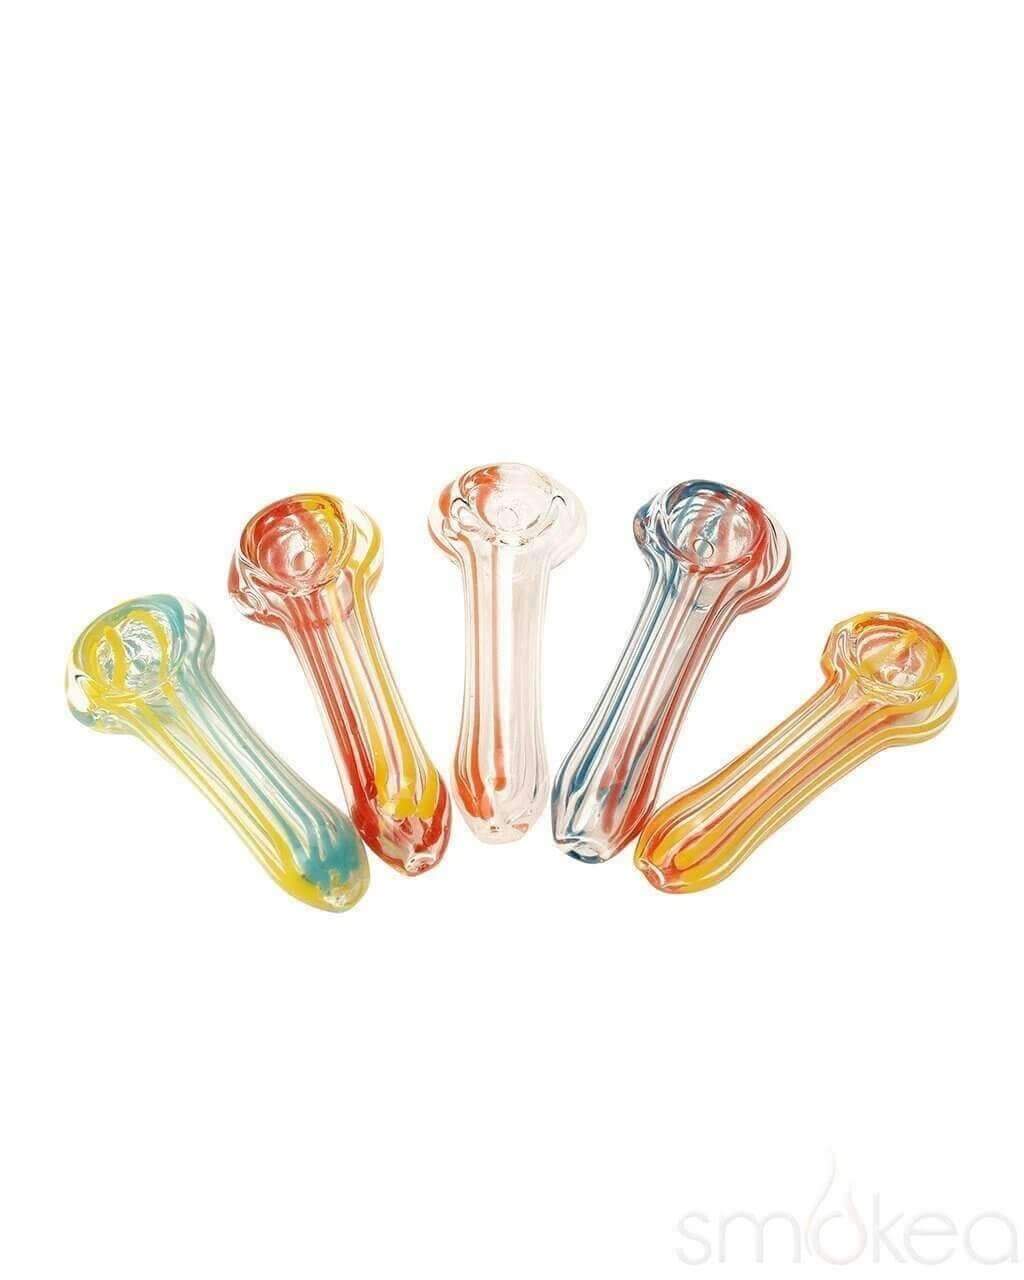 Weed Pipes: Wholesale Cannabis Smoking Pipes for Smoke Shops